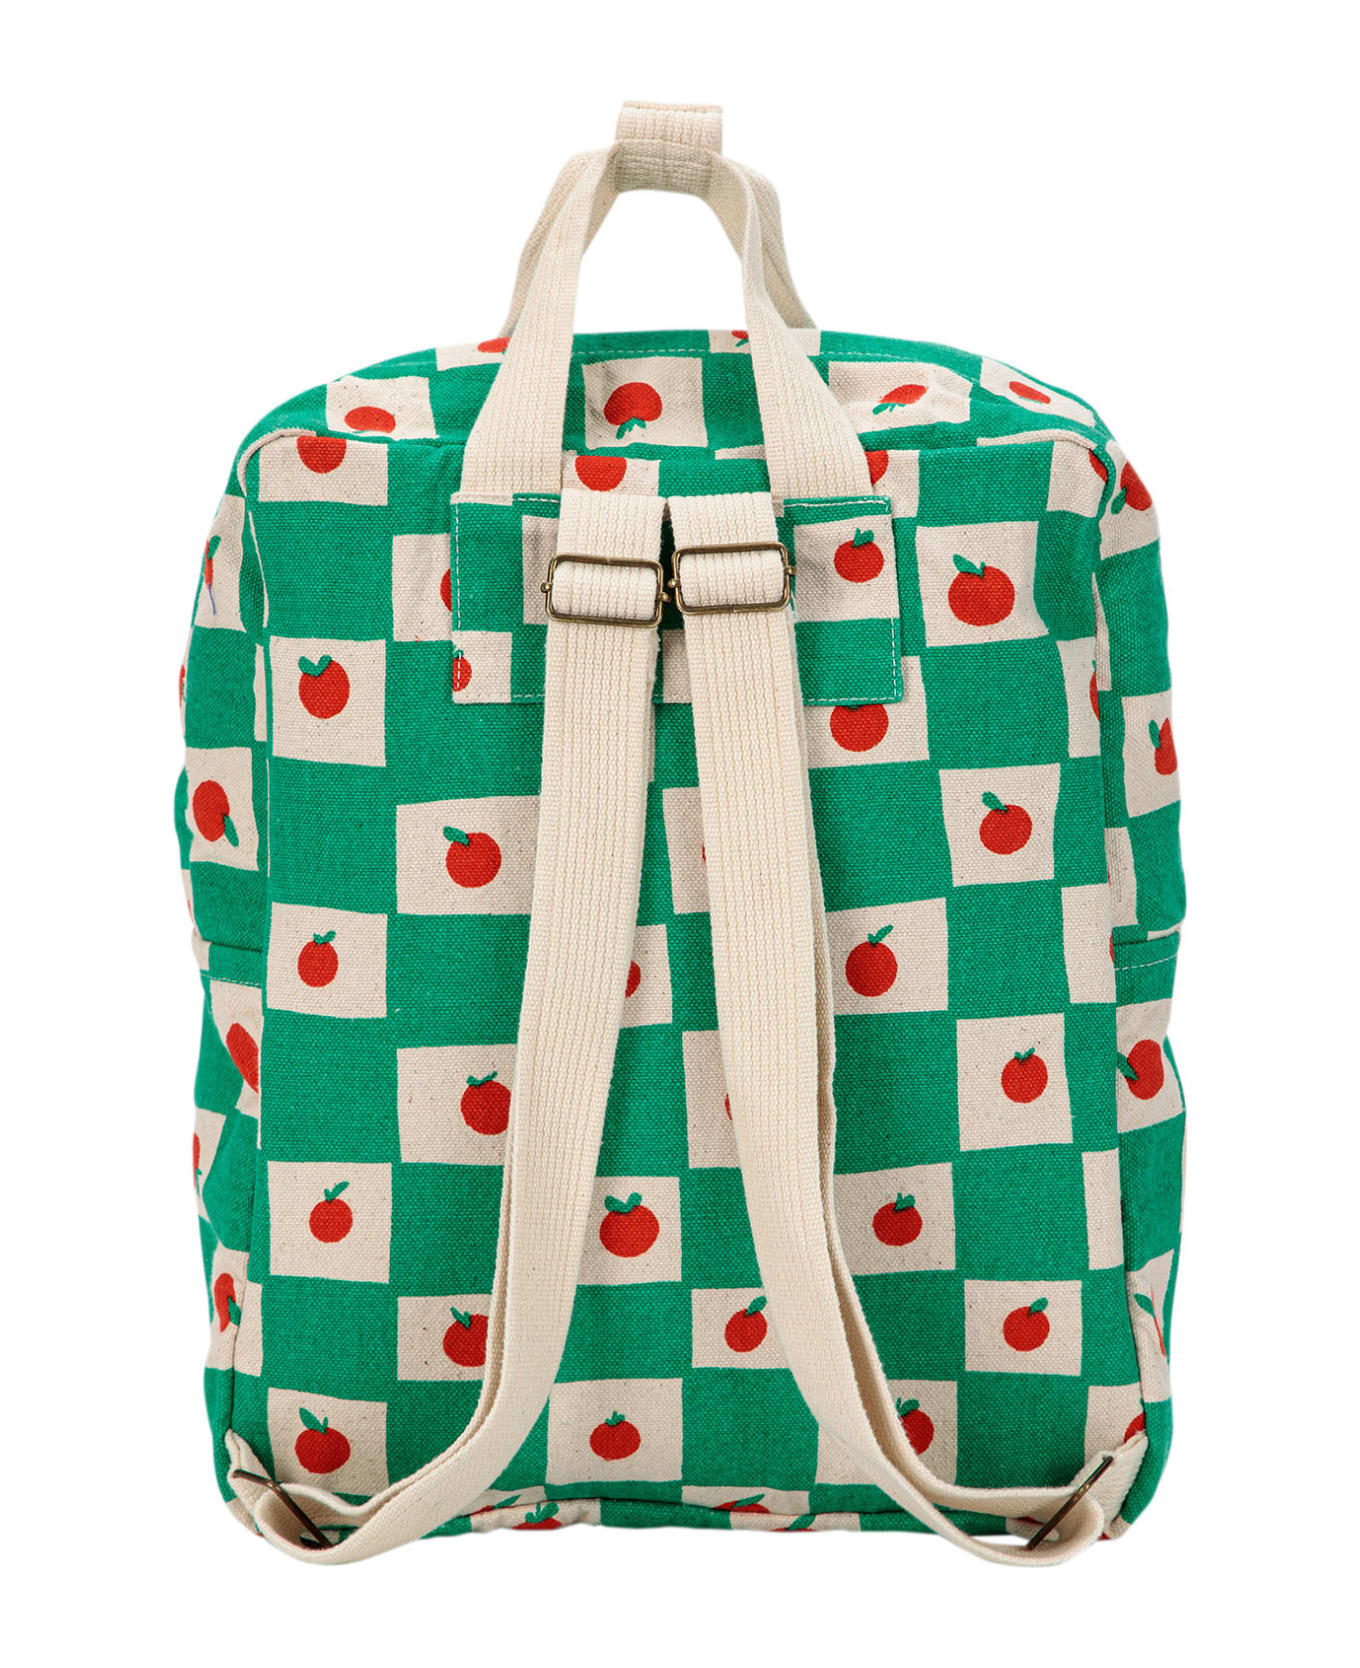 Bobo Choses Green Backpack With Tomatoes For Kids - Green アクセサリー＆ギフト